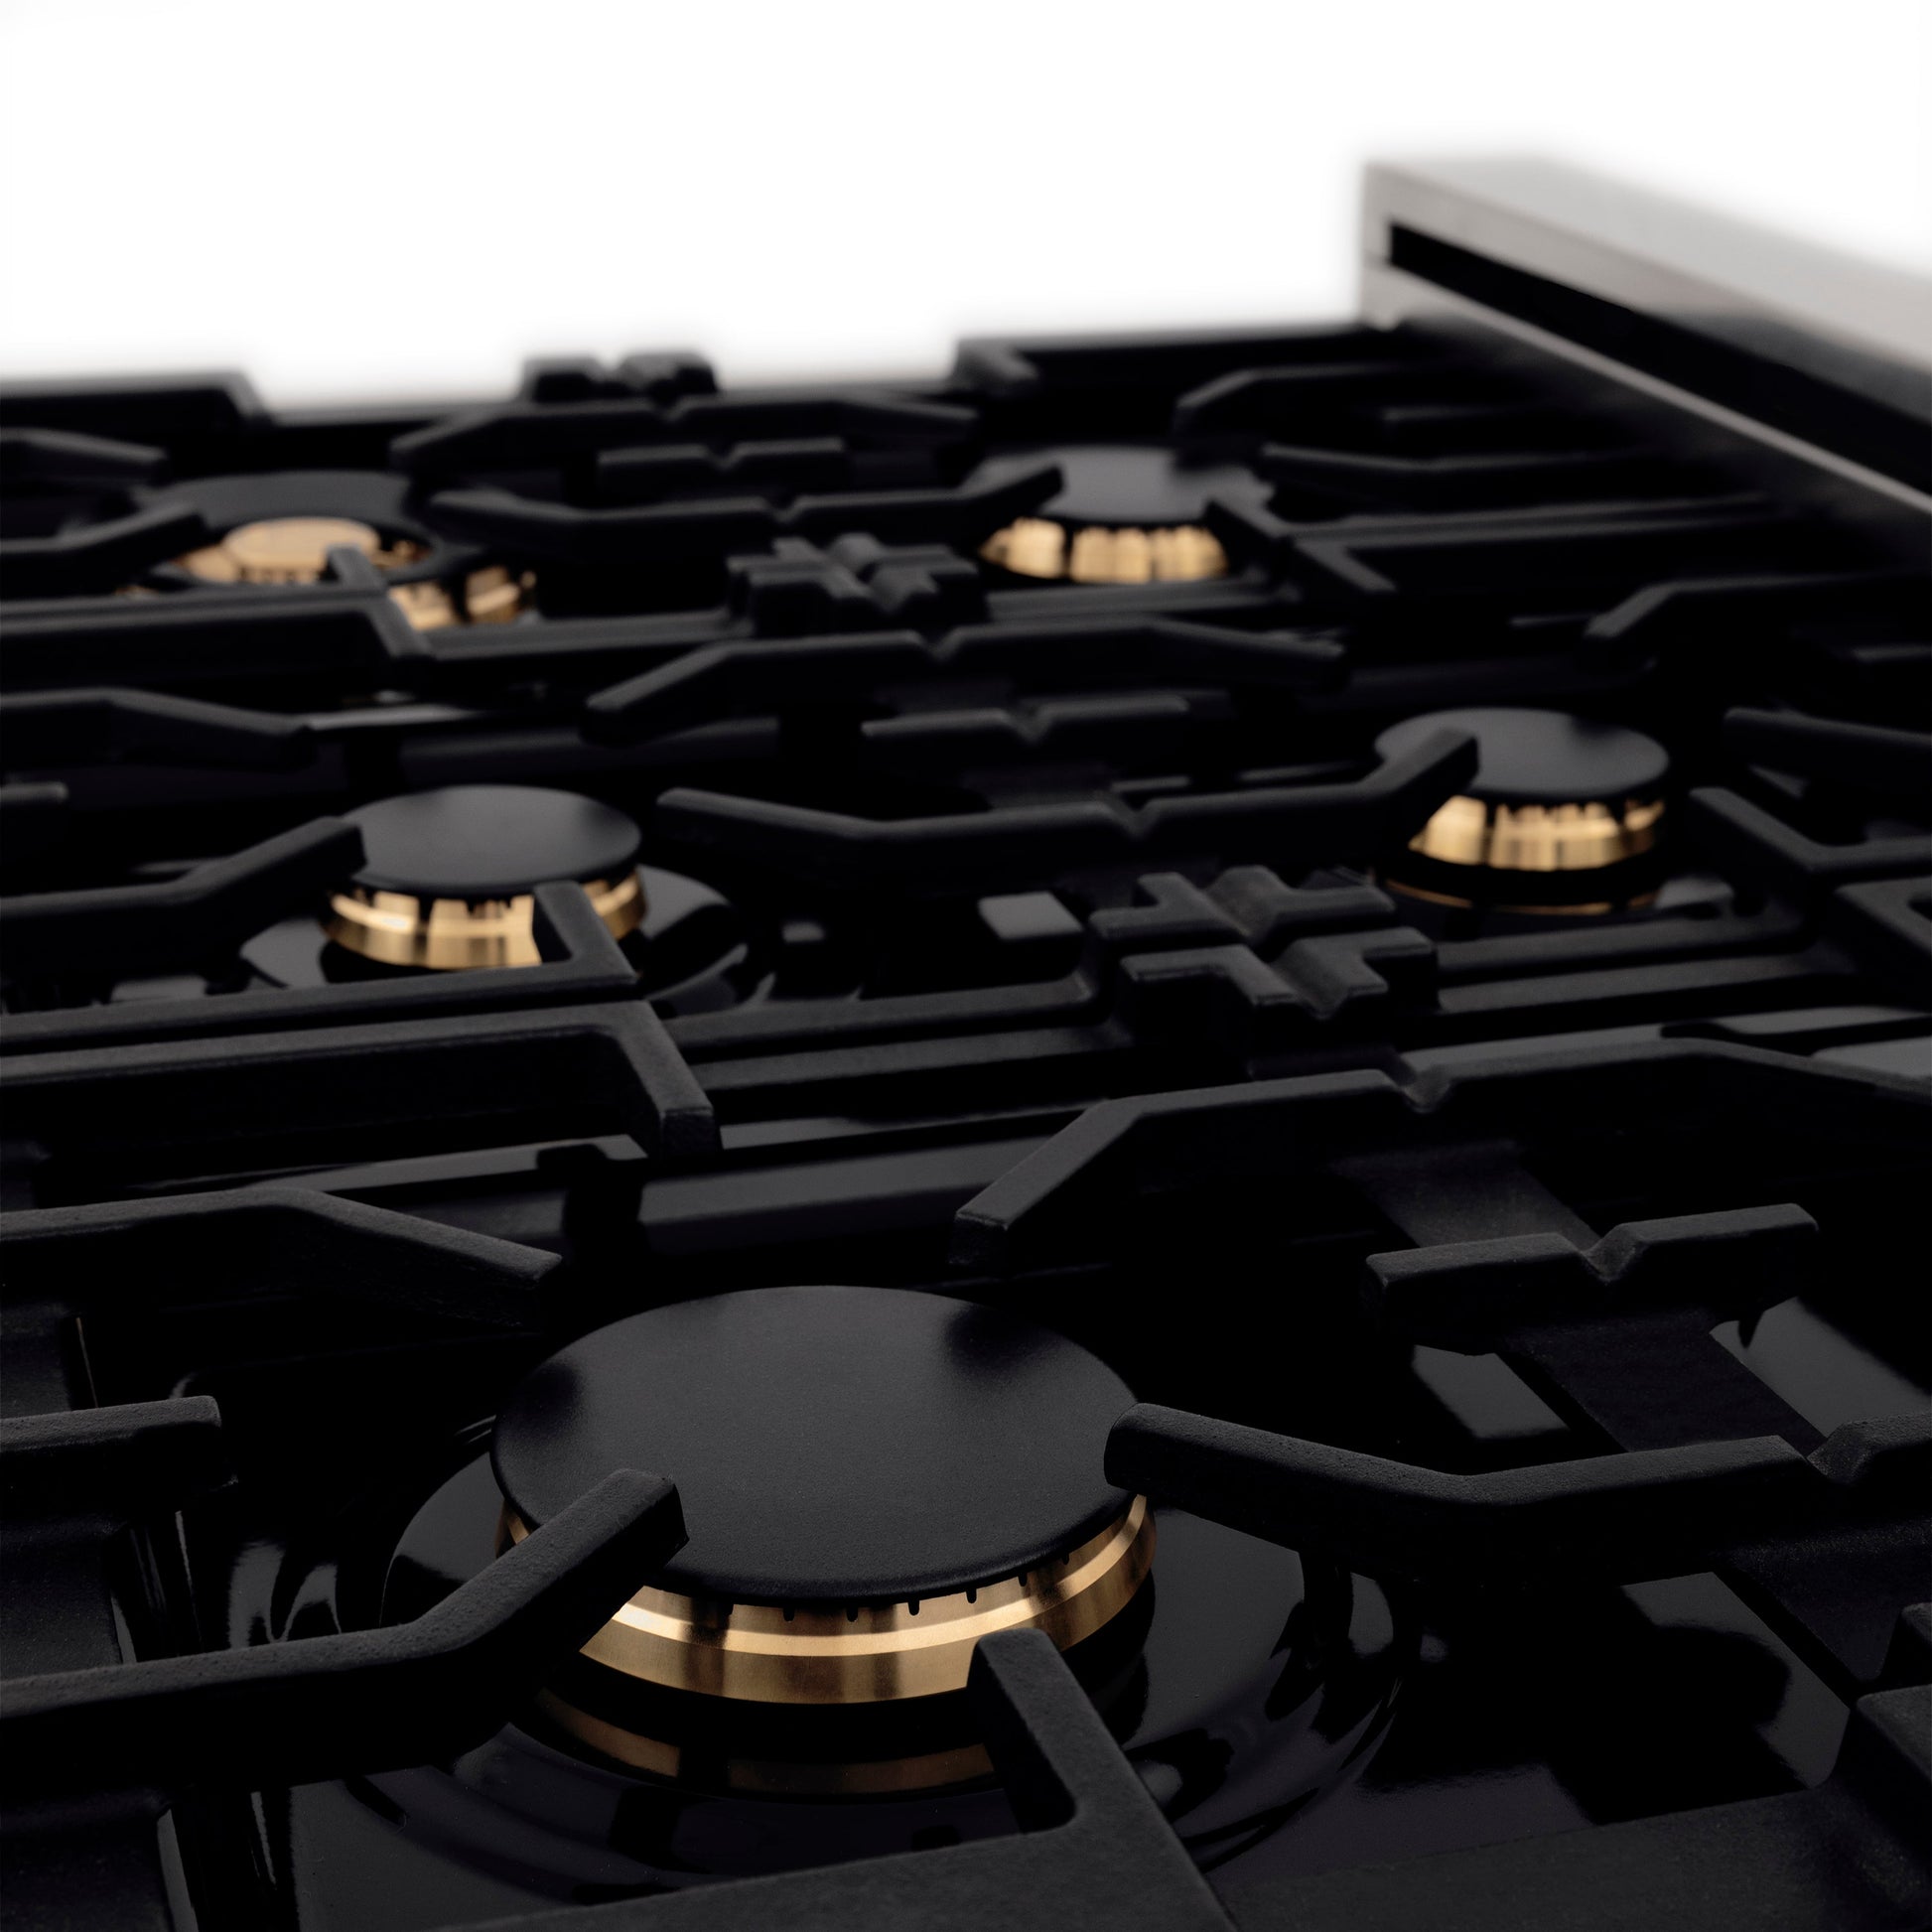 ZLINE Autograph Edition 36" Porcelain Rangetop with 6 Gas Burners - Stainless Steel with Accents